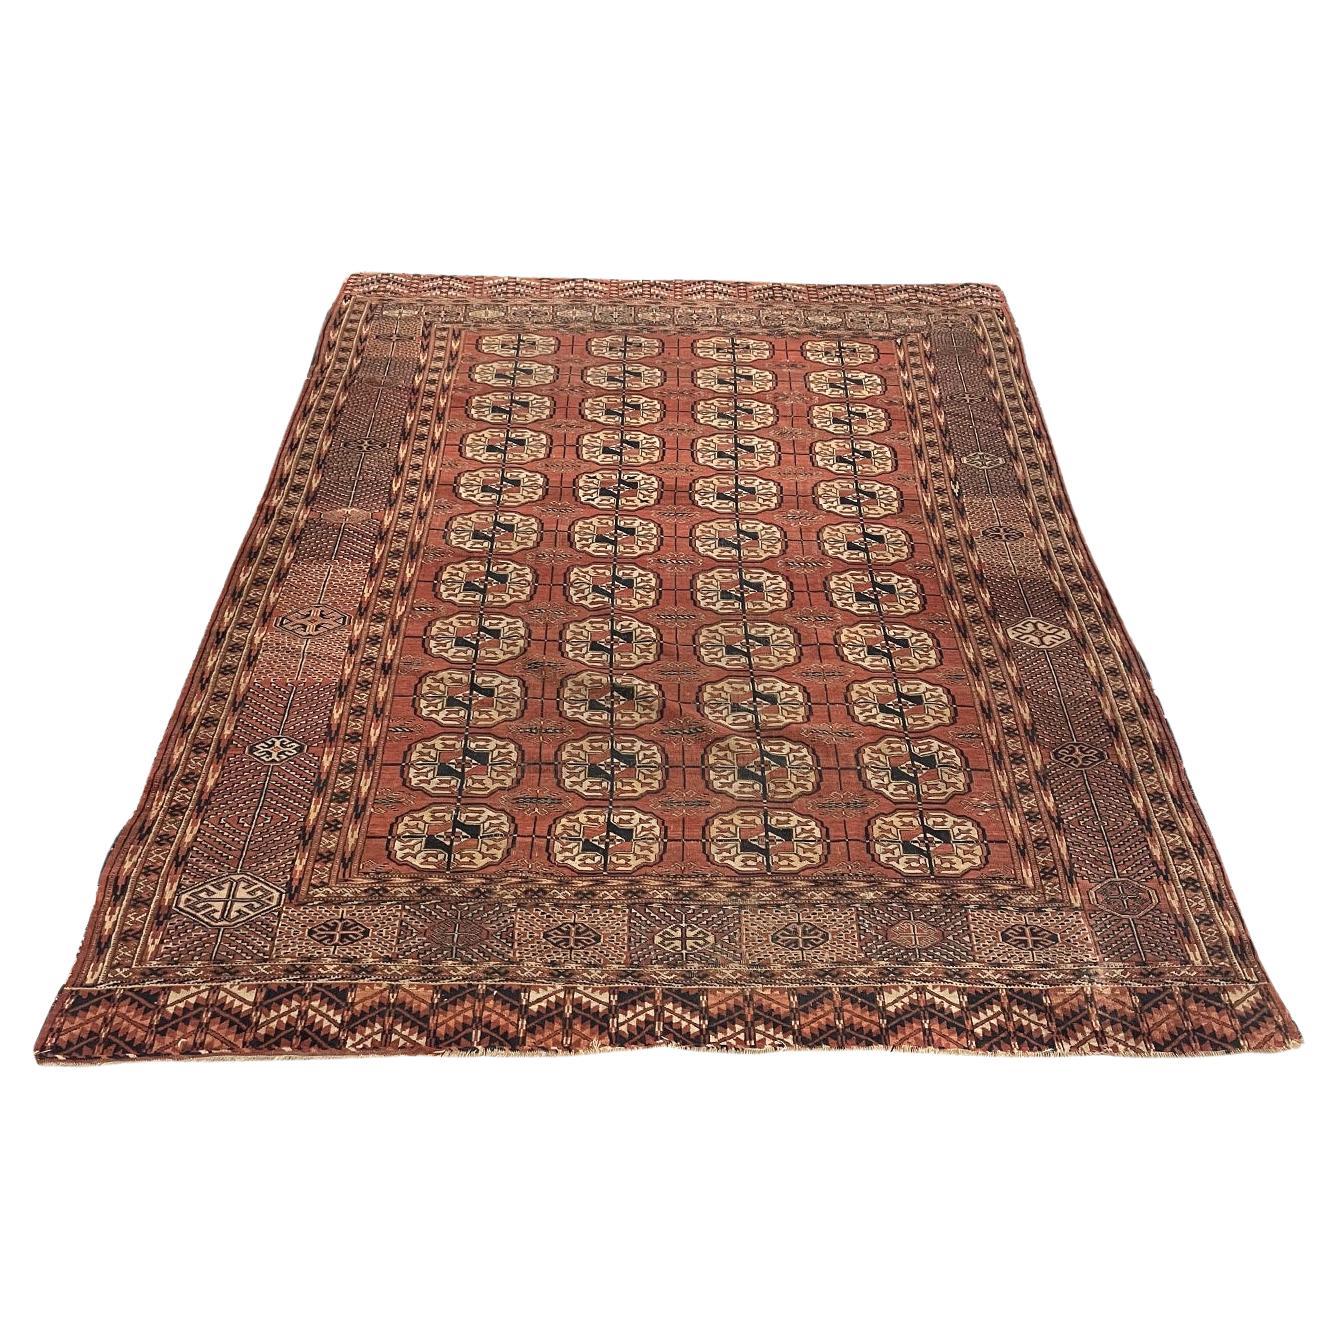 What is a Bokhara rug?